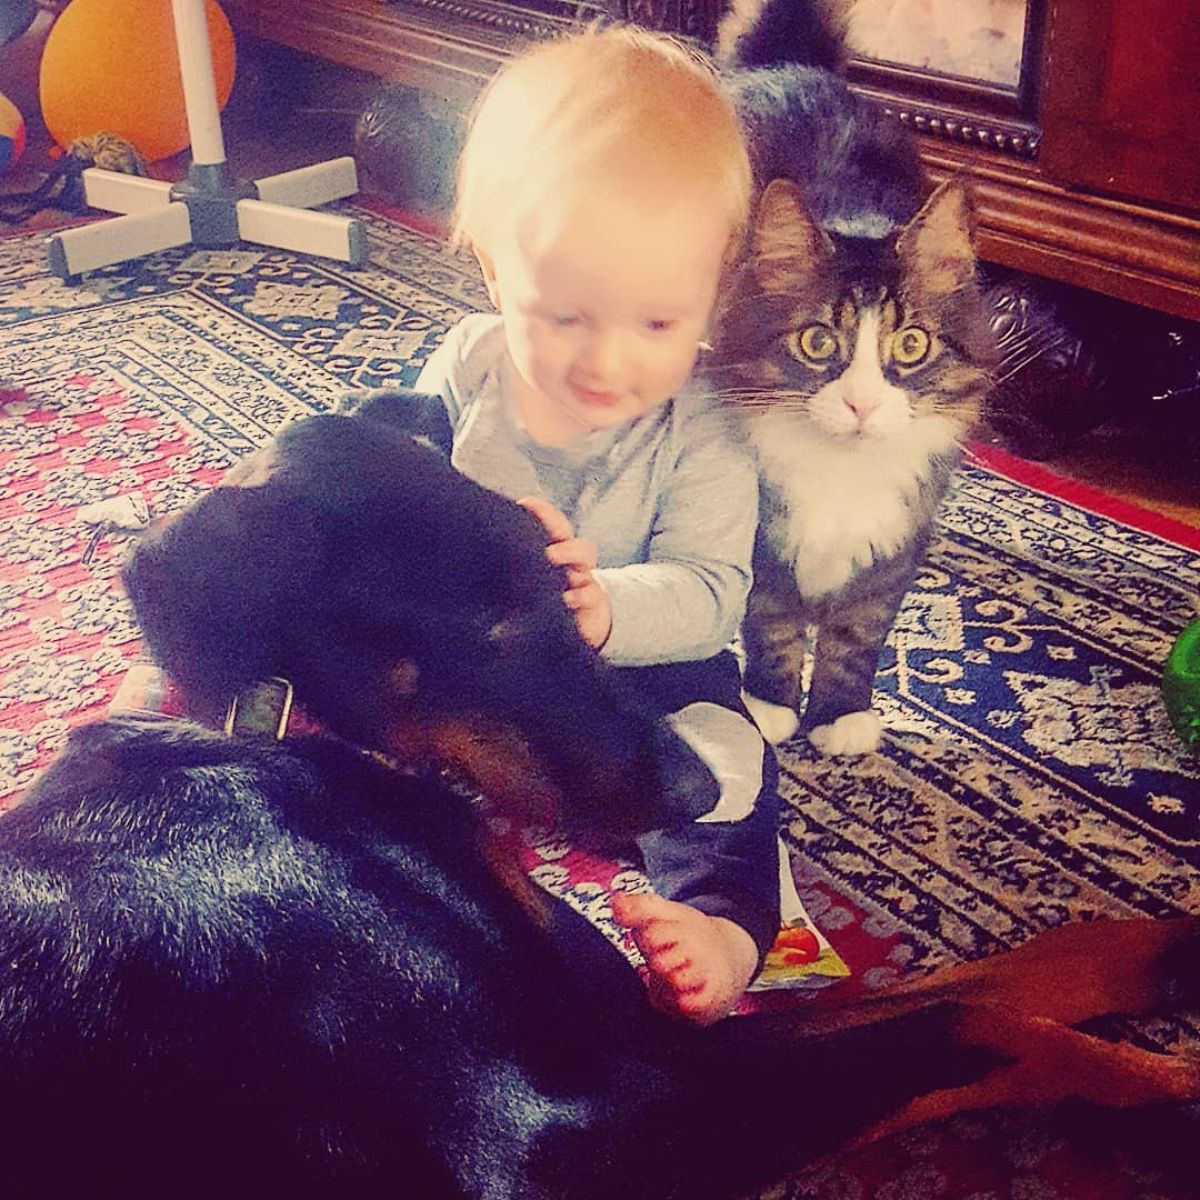 A baby playing with a dog and a tabby maine coon on a carpet.